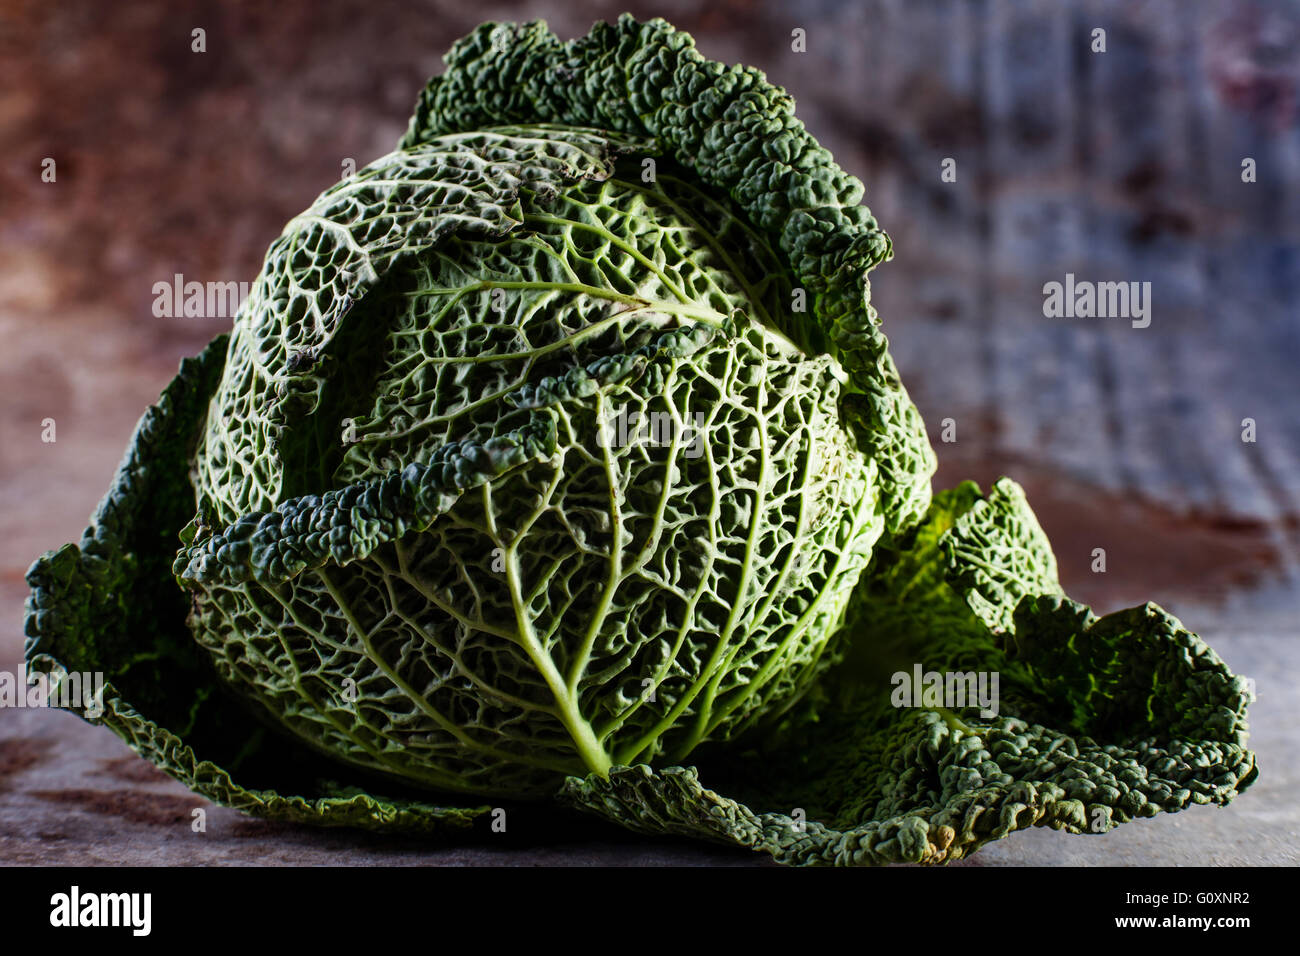 Green cabbage on rusty metal background Stock Photo